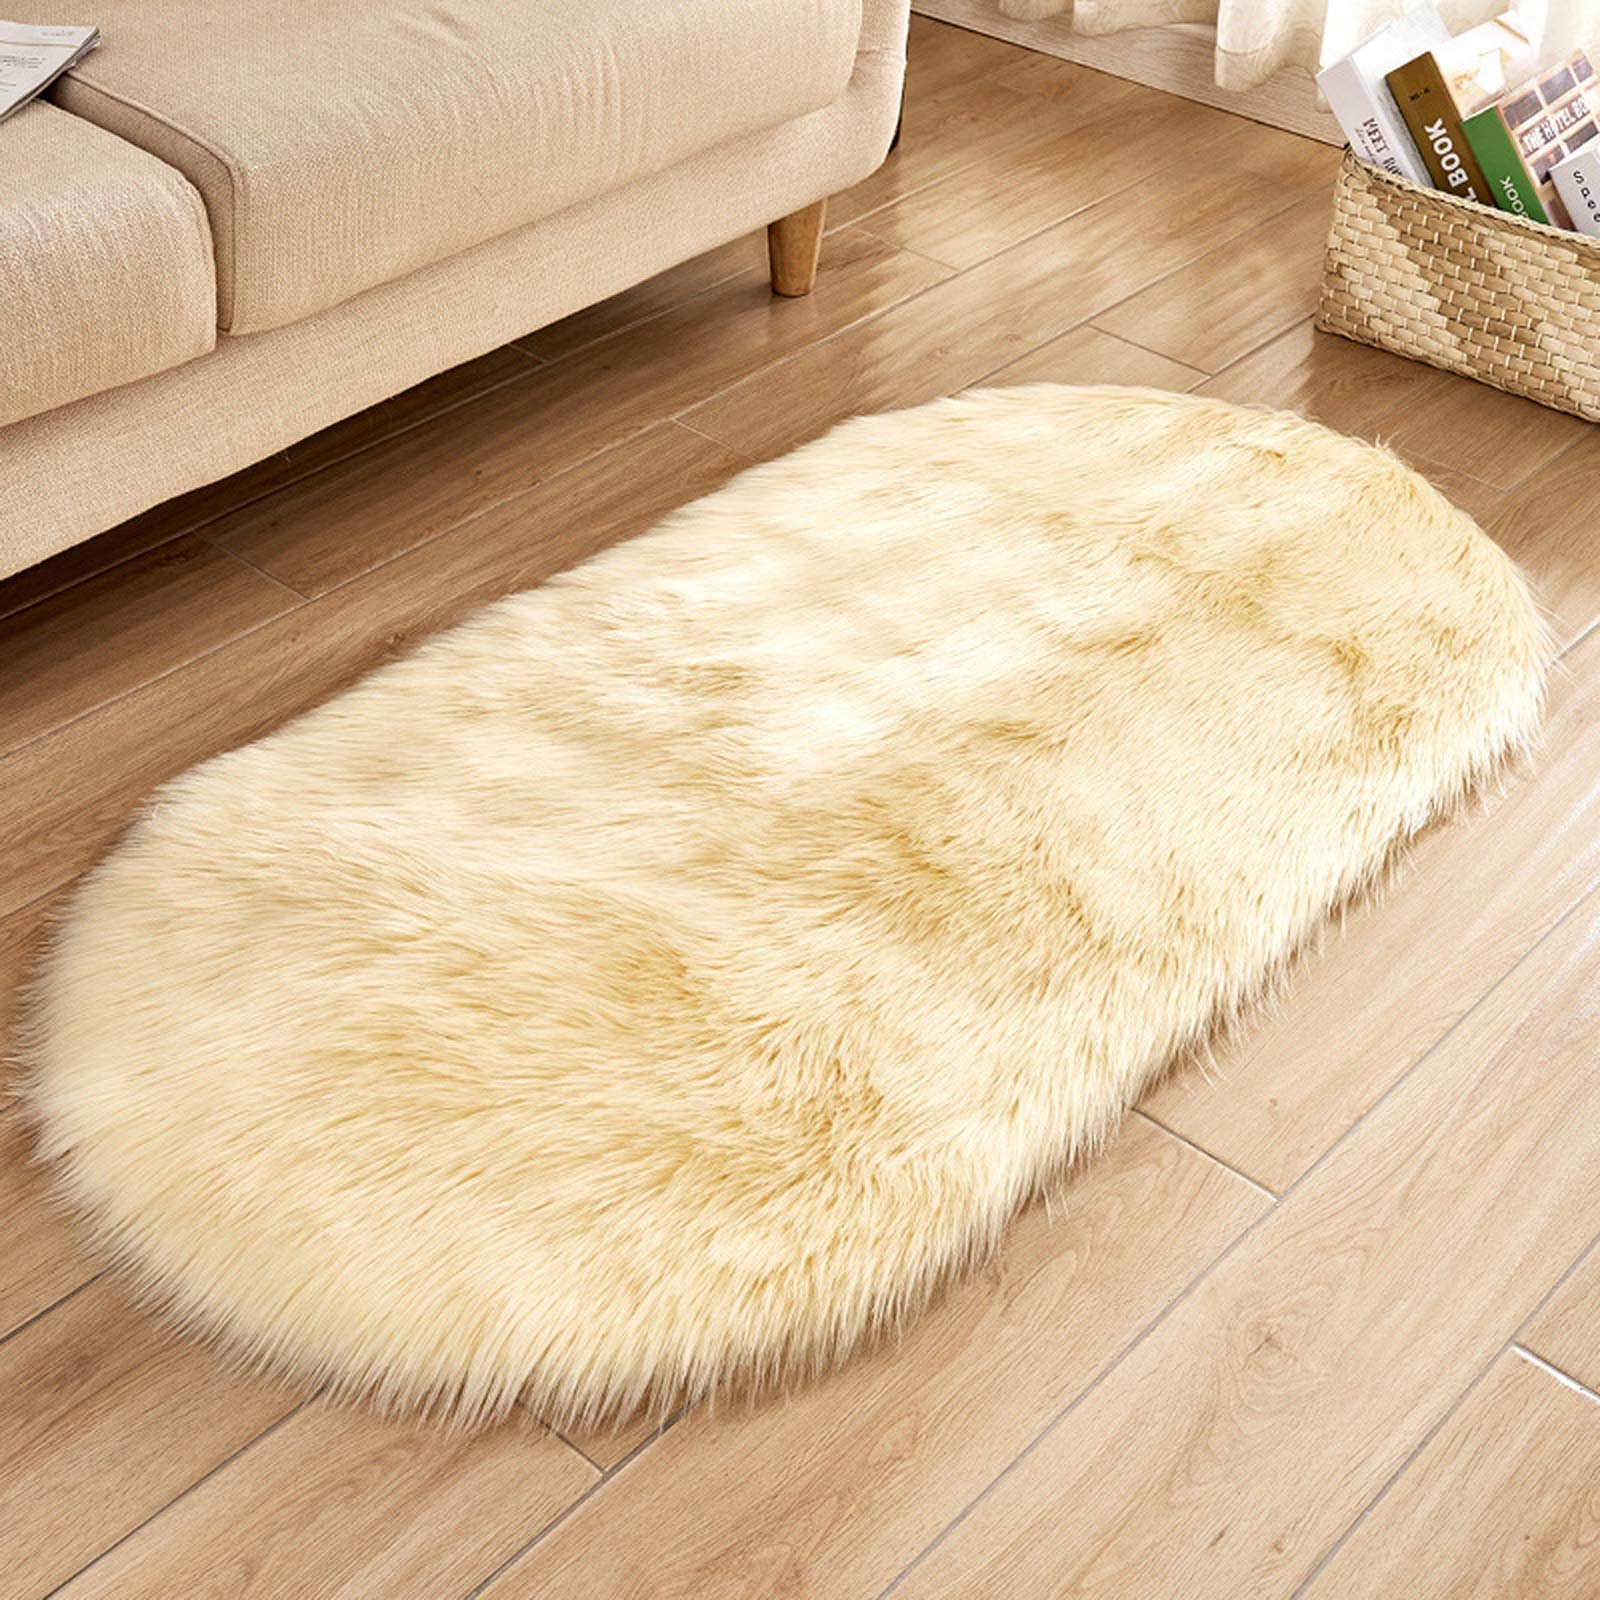 HACHUM Super Soft Faux Sheepskin Area Rugs For Bedroom Floor Plush ...